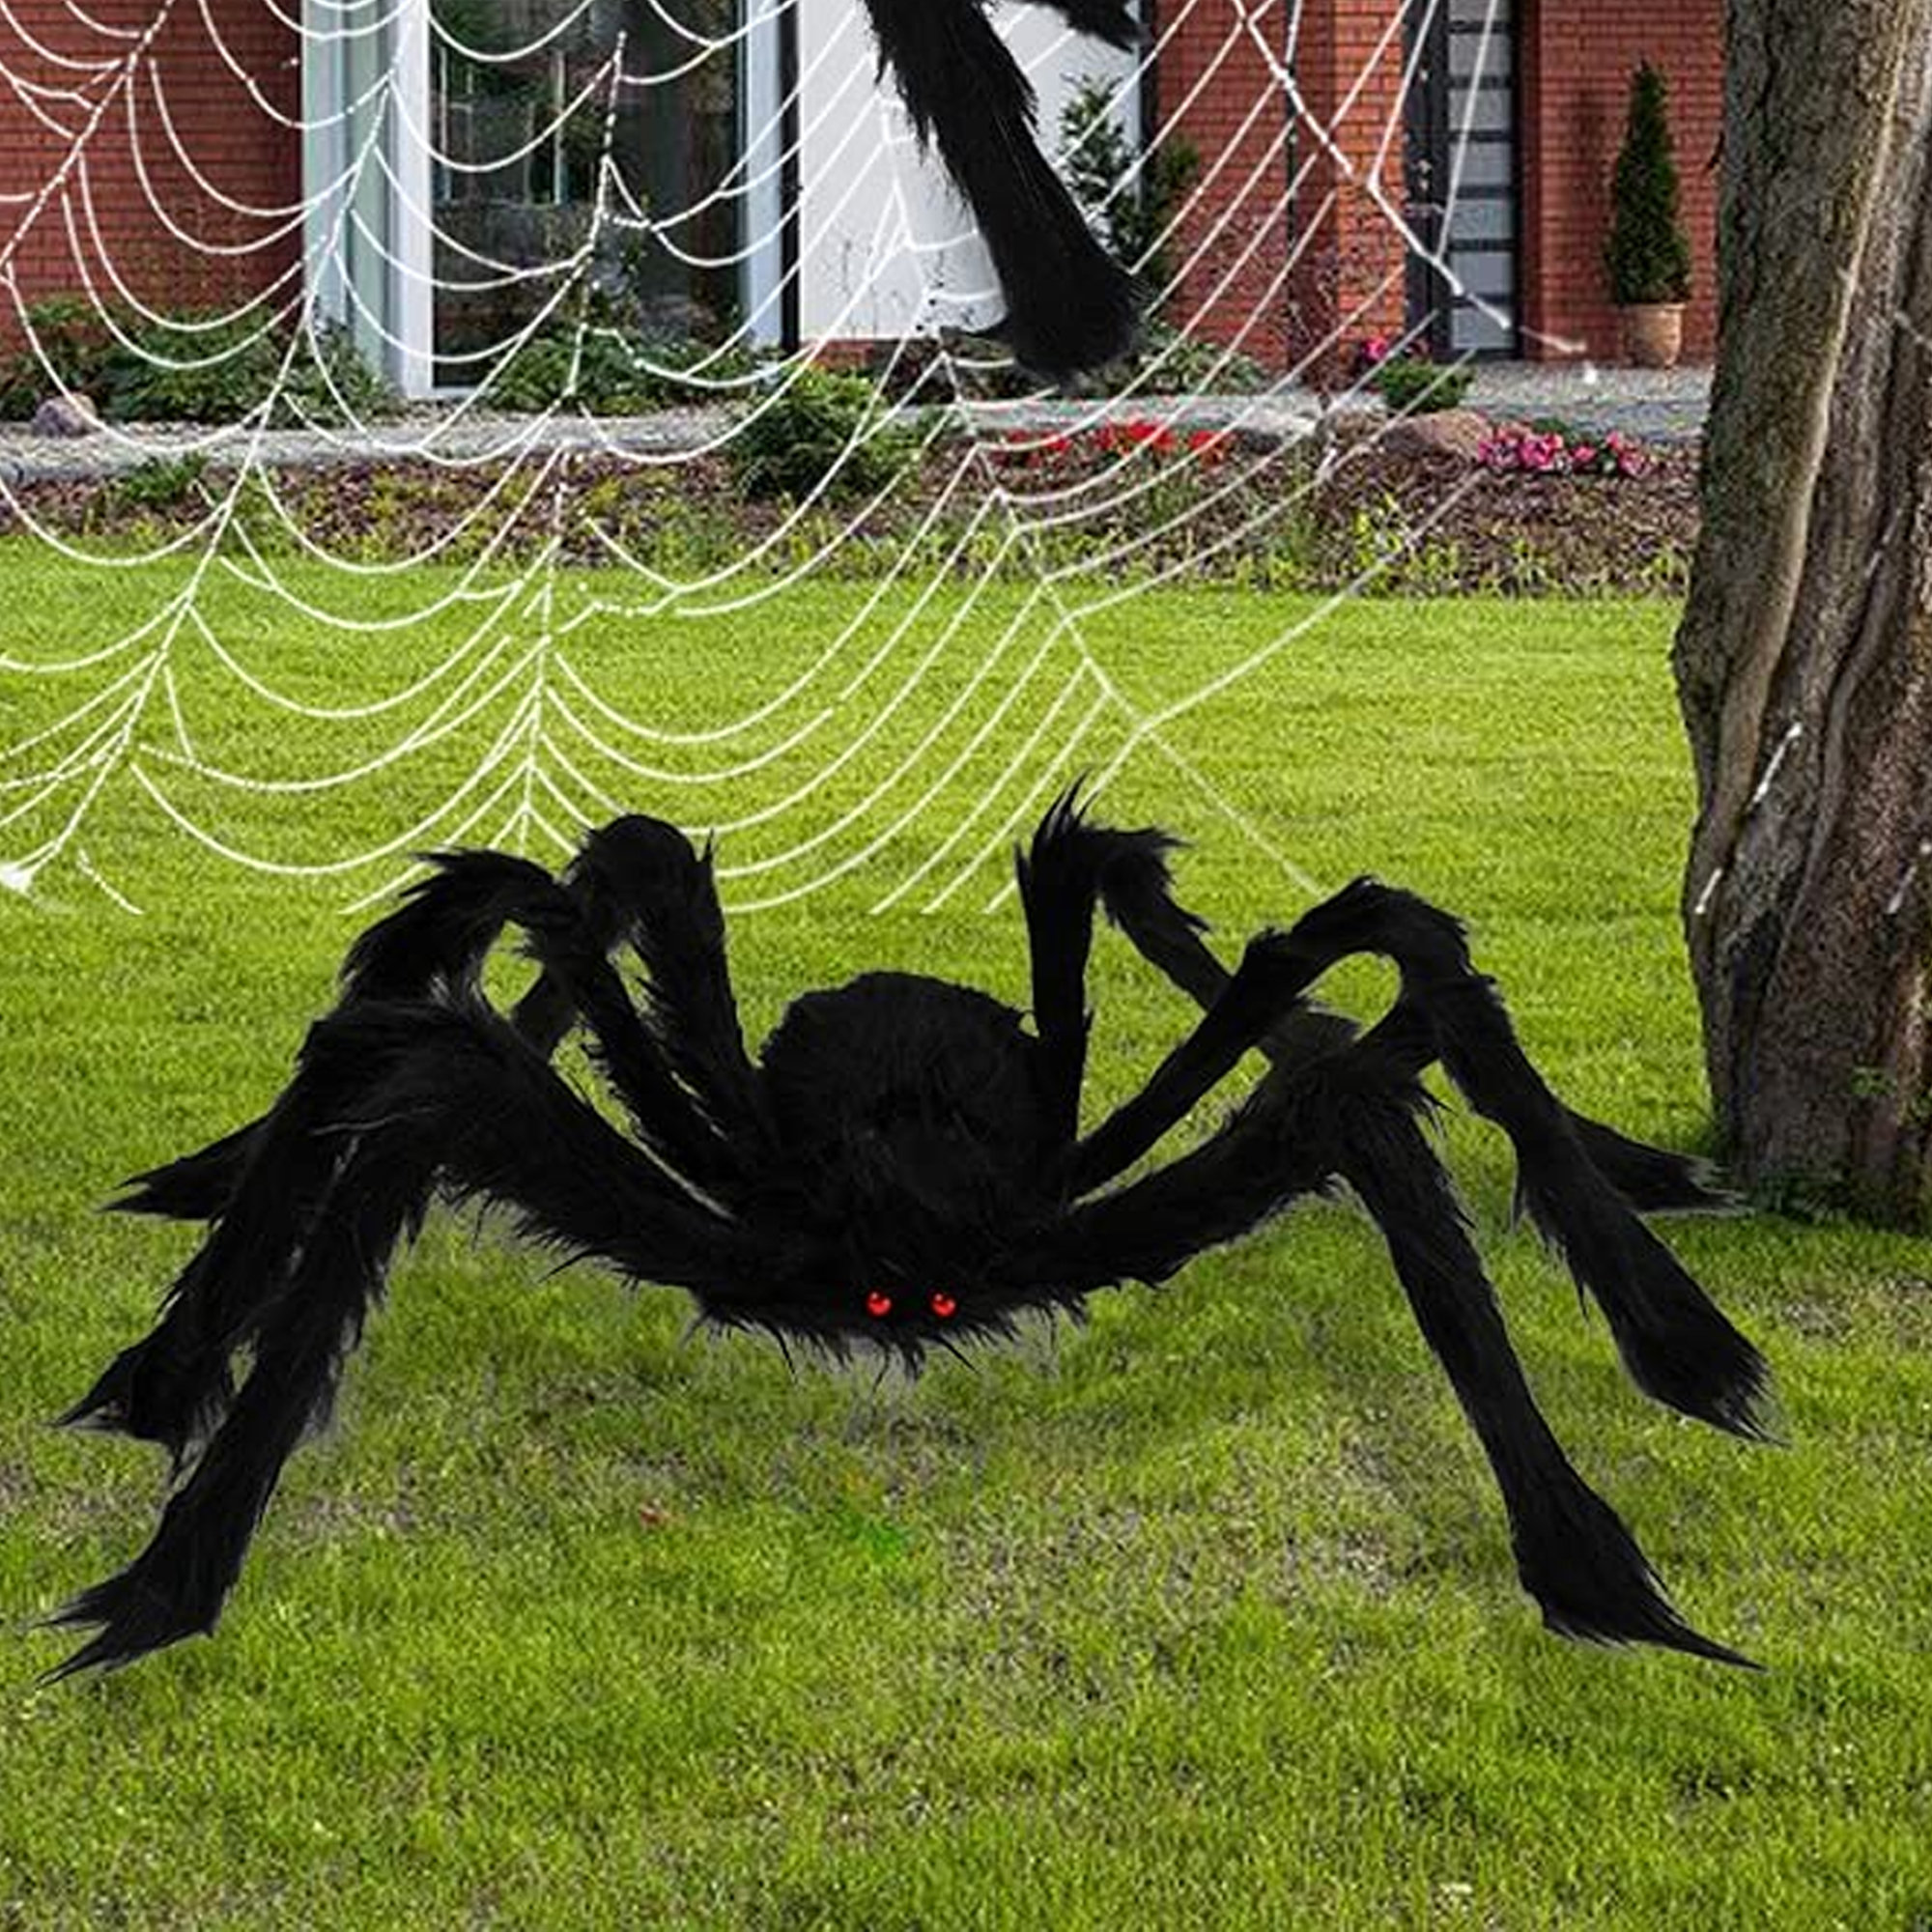 The Holiday Aisle® Halloween Gigantic Hairy Scary Fake Spider Decoration   Reviews | Wayfair